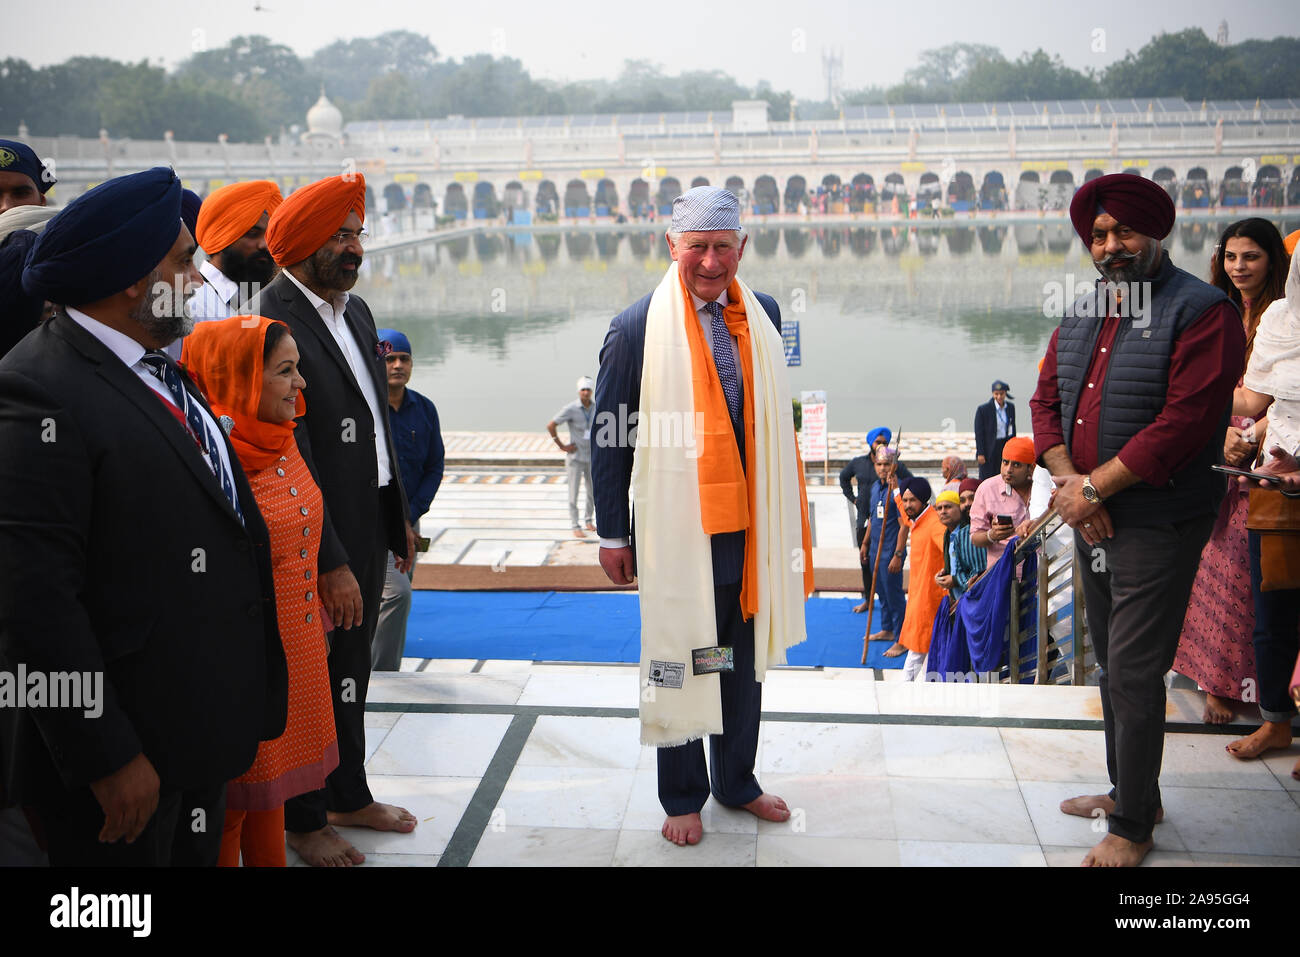 The Prince of Wales barefooted during his visit to the Bangla Sahib Gurdwara Sikh Temple, New Delhi, to celebrate the 550th anniversary of the birth of Guru Nanak, the founder of Sikhism, on day one of the royal visit to India. Stock Photo